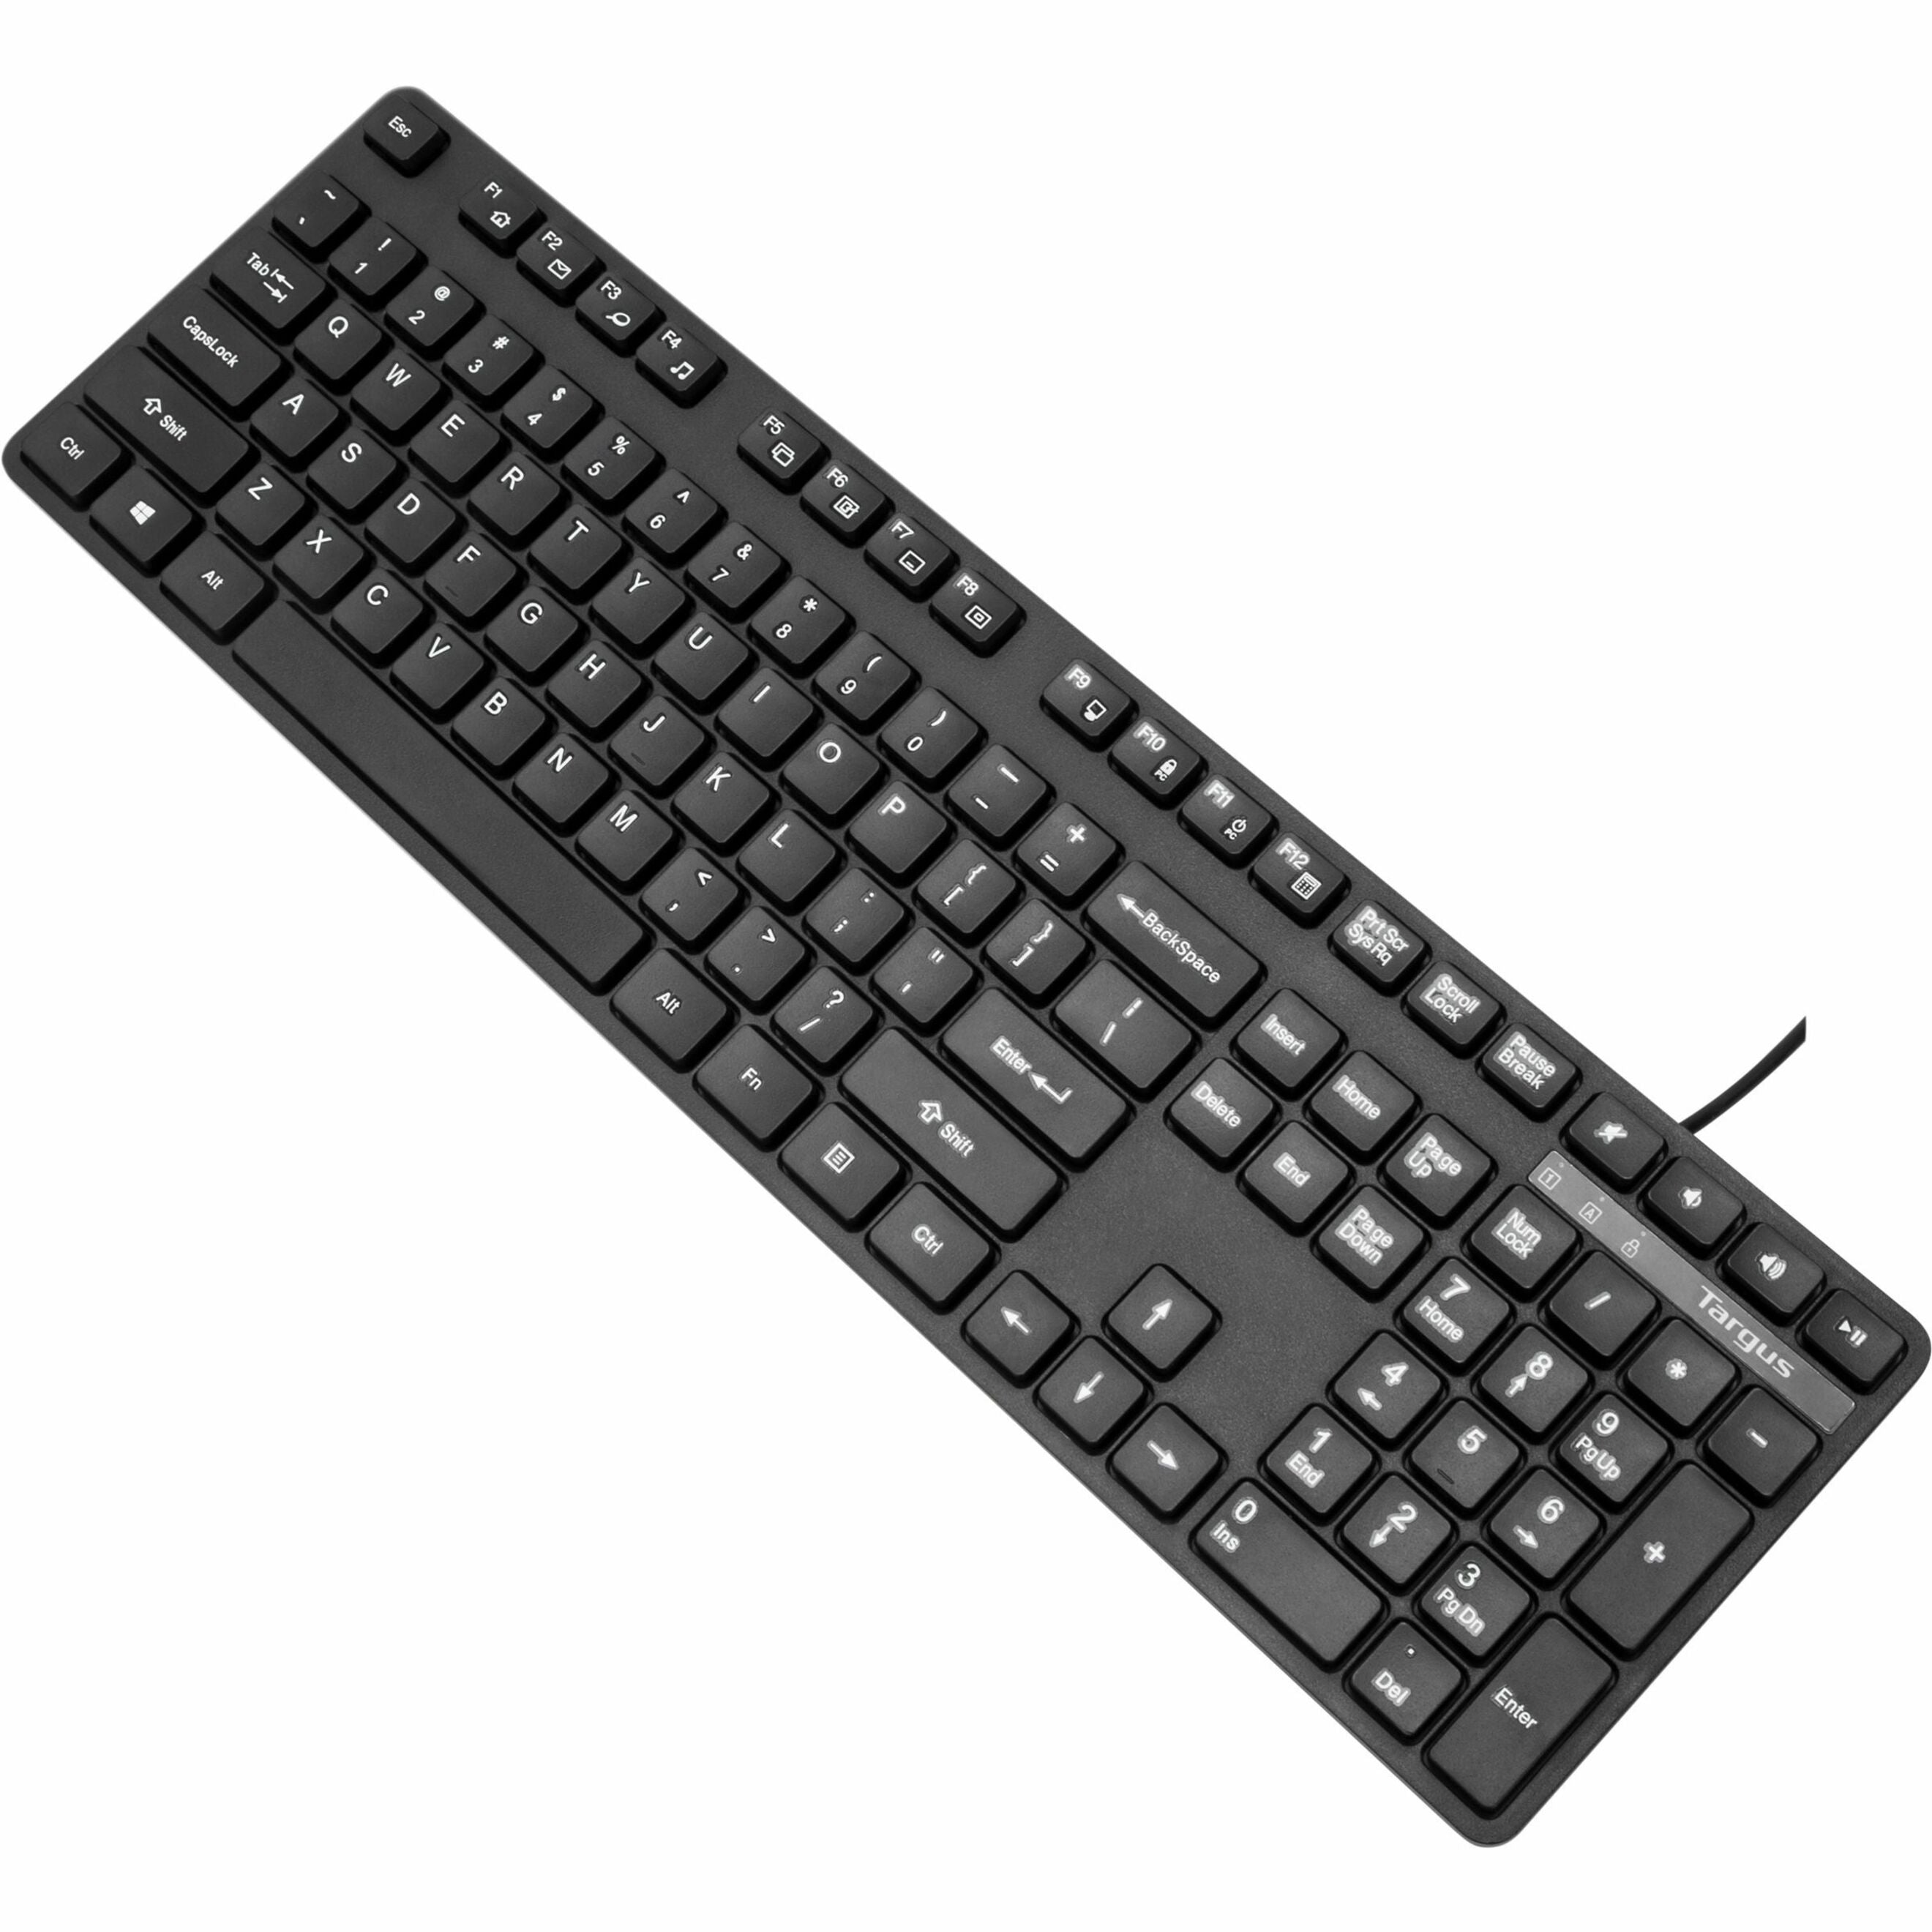 Targus AKB30AMUS Full-Size Antimicrobial Wired Keyboard, Plug & Play, USB Connectivity